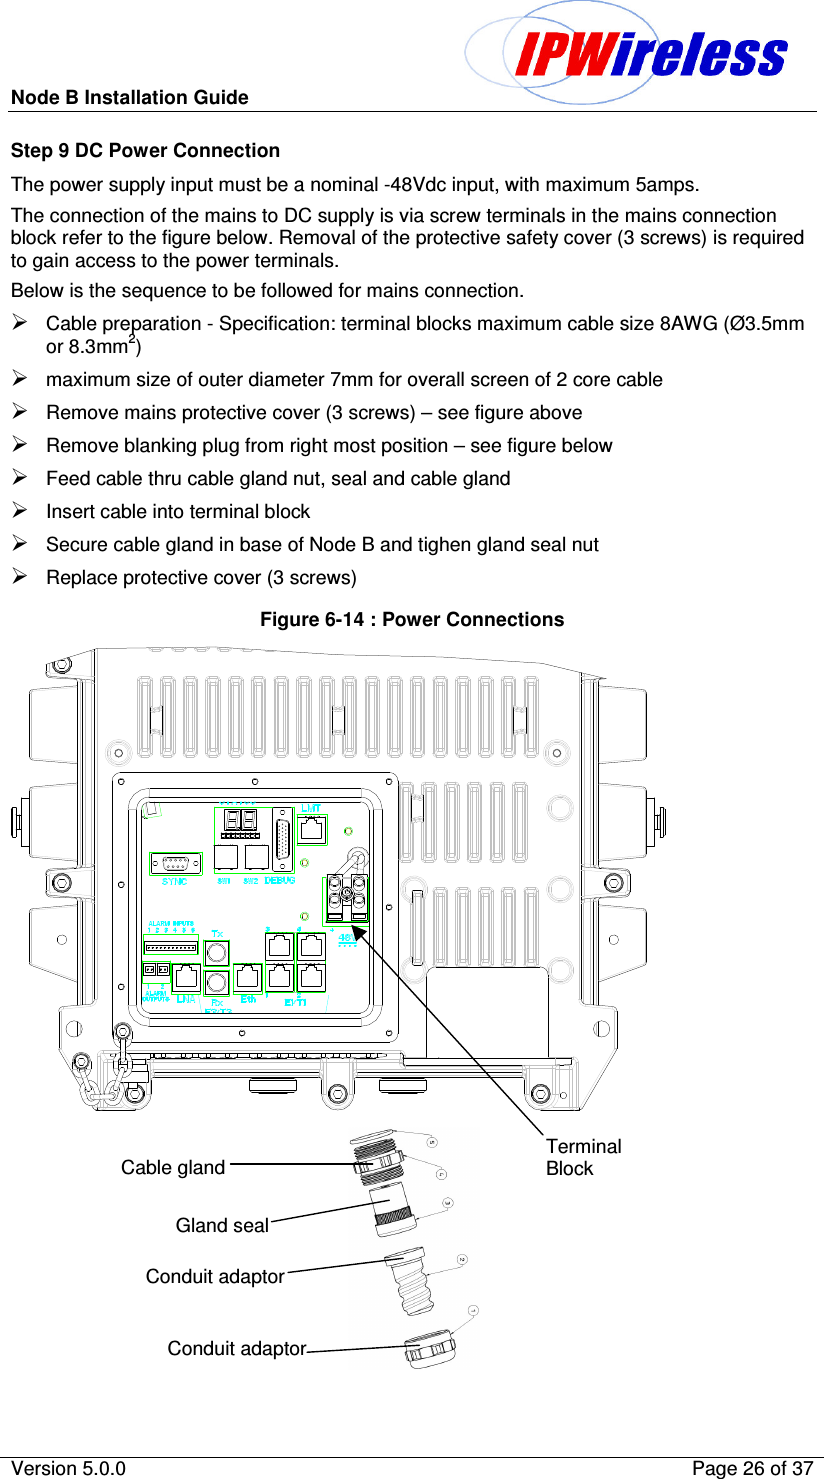 Node B Installation Guide                                              Version 5.0.0    Page 26 of 37  Step 9 DC Power Connection The power supply input must be a nominal -48Vdc input, with maximum 5amps. The connection of the mains to DC supply is via screw terminals in the mains connection block refer to the figure below. Removal of the protective safety cover (3 screws) is required to gain access to the power terminals. Below is the sequence to be followed for mains connection.  Cable preparation - Specification: terminal blocks maximum cable size 8AWG (Ø3.5mm or 8.3mm2) maximum size of outer diameter 7mm for overall screen of 2 core cable Remove mains protective cover (3 screws) – see figure above Remove blanking plug from right most position – see figure below Feed cable thru cable gland nut, seal and cable gland  Insert cable into terminal block Secure cable gland in base of Node B and tighen gland seal nut Replace protective cover (3 screws) Figure 6-14 : Power Connections                                                                    Cable gland Gland seal Conduit adaptor Conduit adaptor Terminal Block 